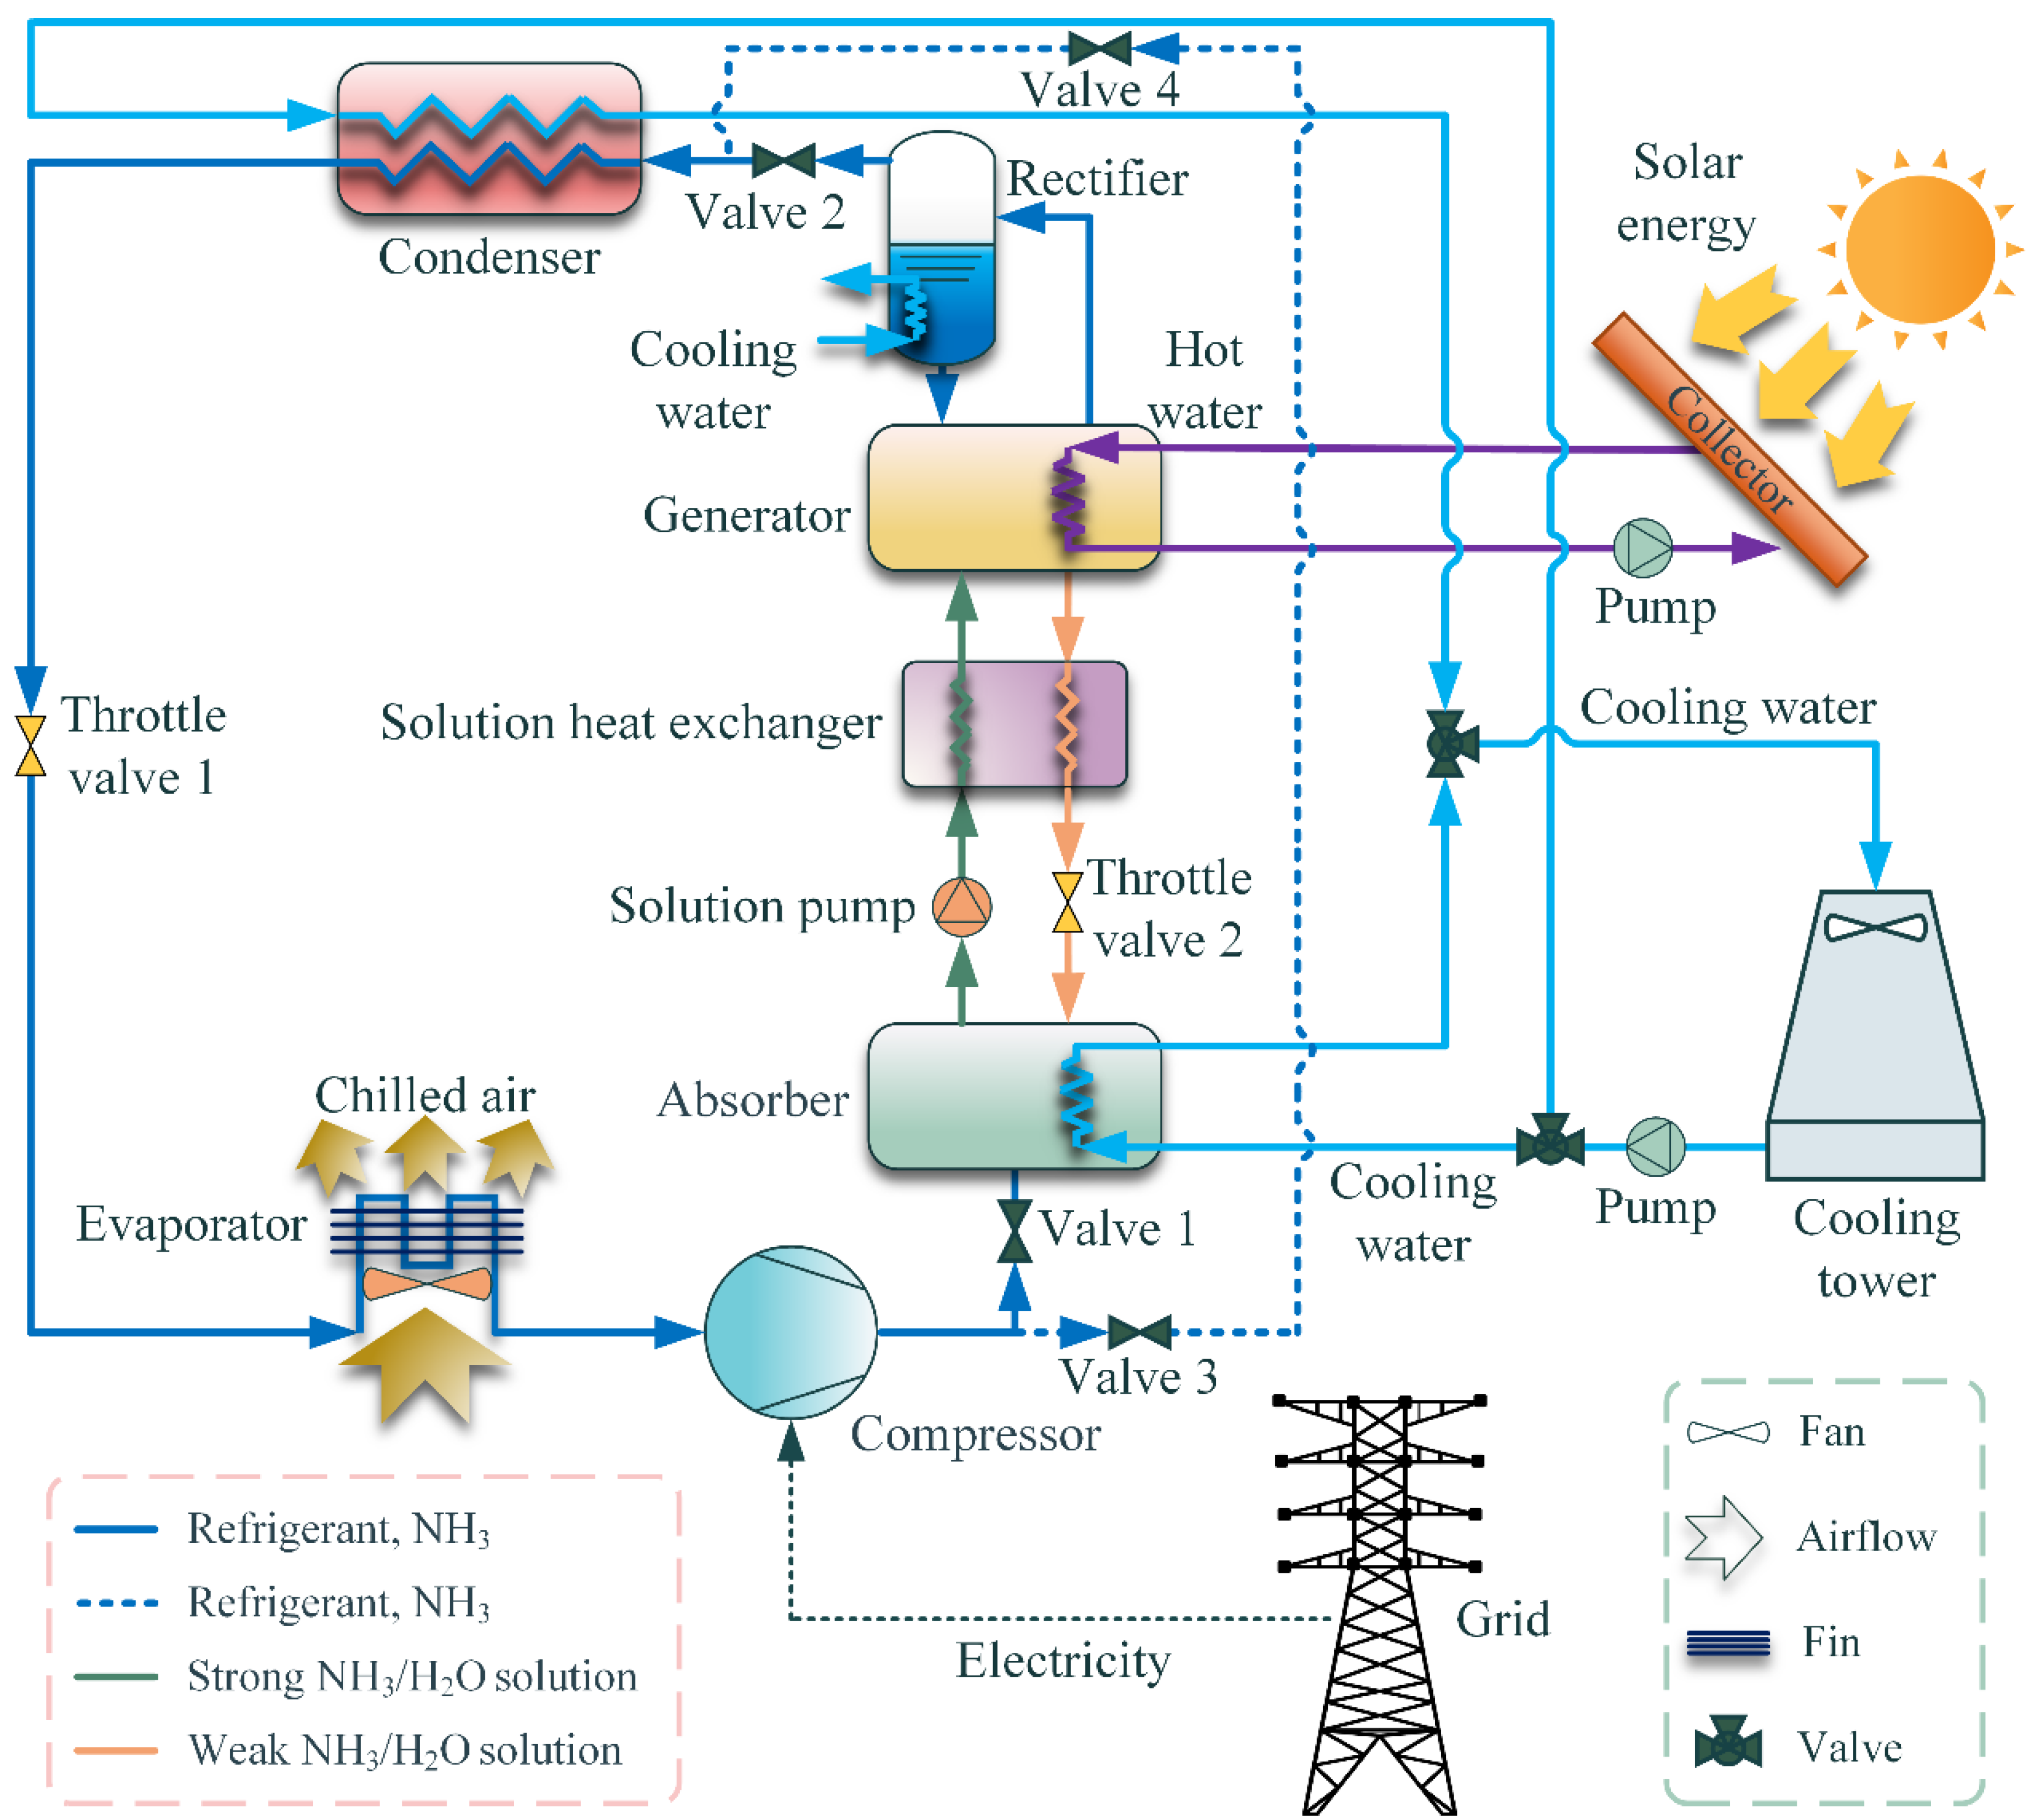 Energies | Free Full-Text | Thermodynamic Study of Solar-Assisted ...